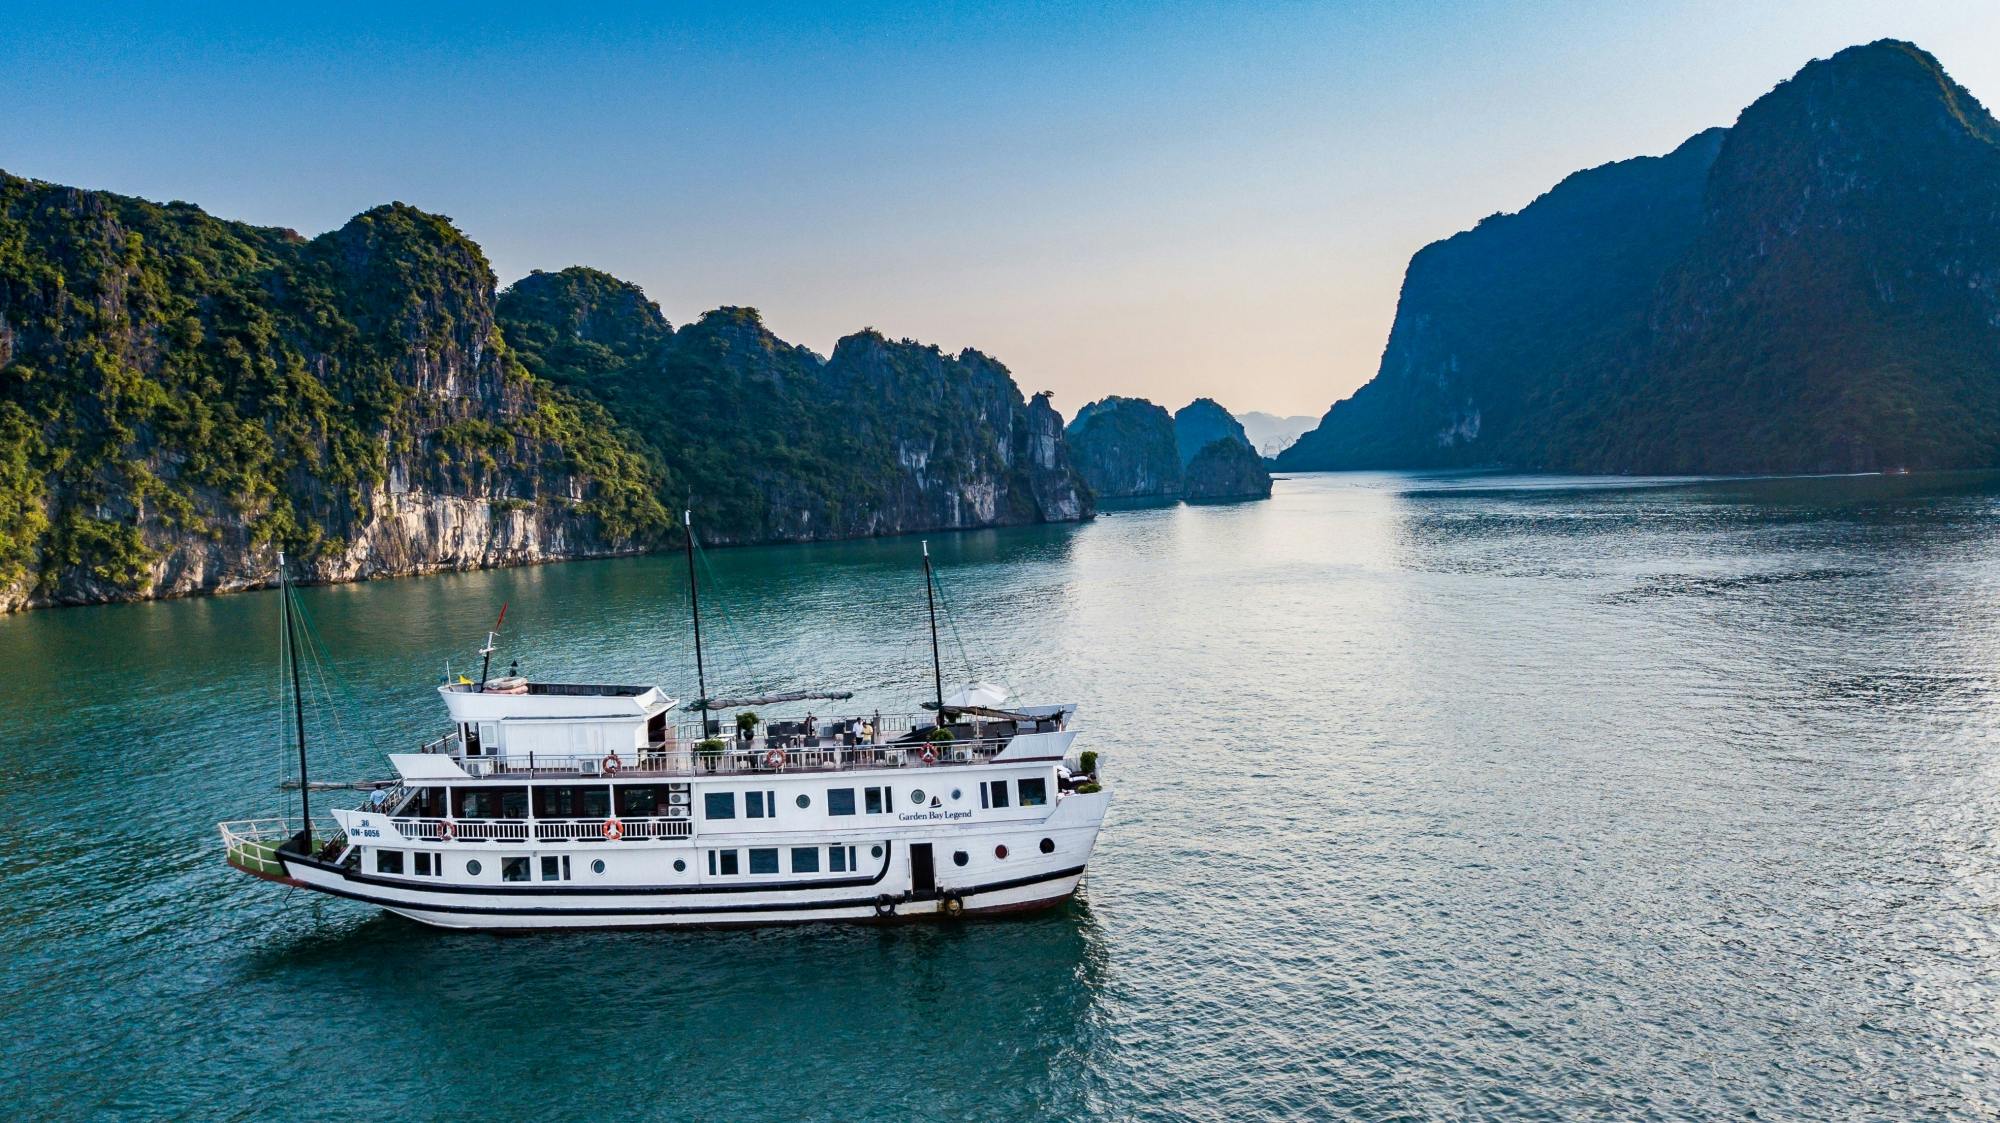 Halong Bay 2 days and 1 night on boat cruise from Hanoi Musement